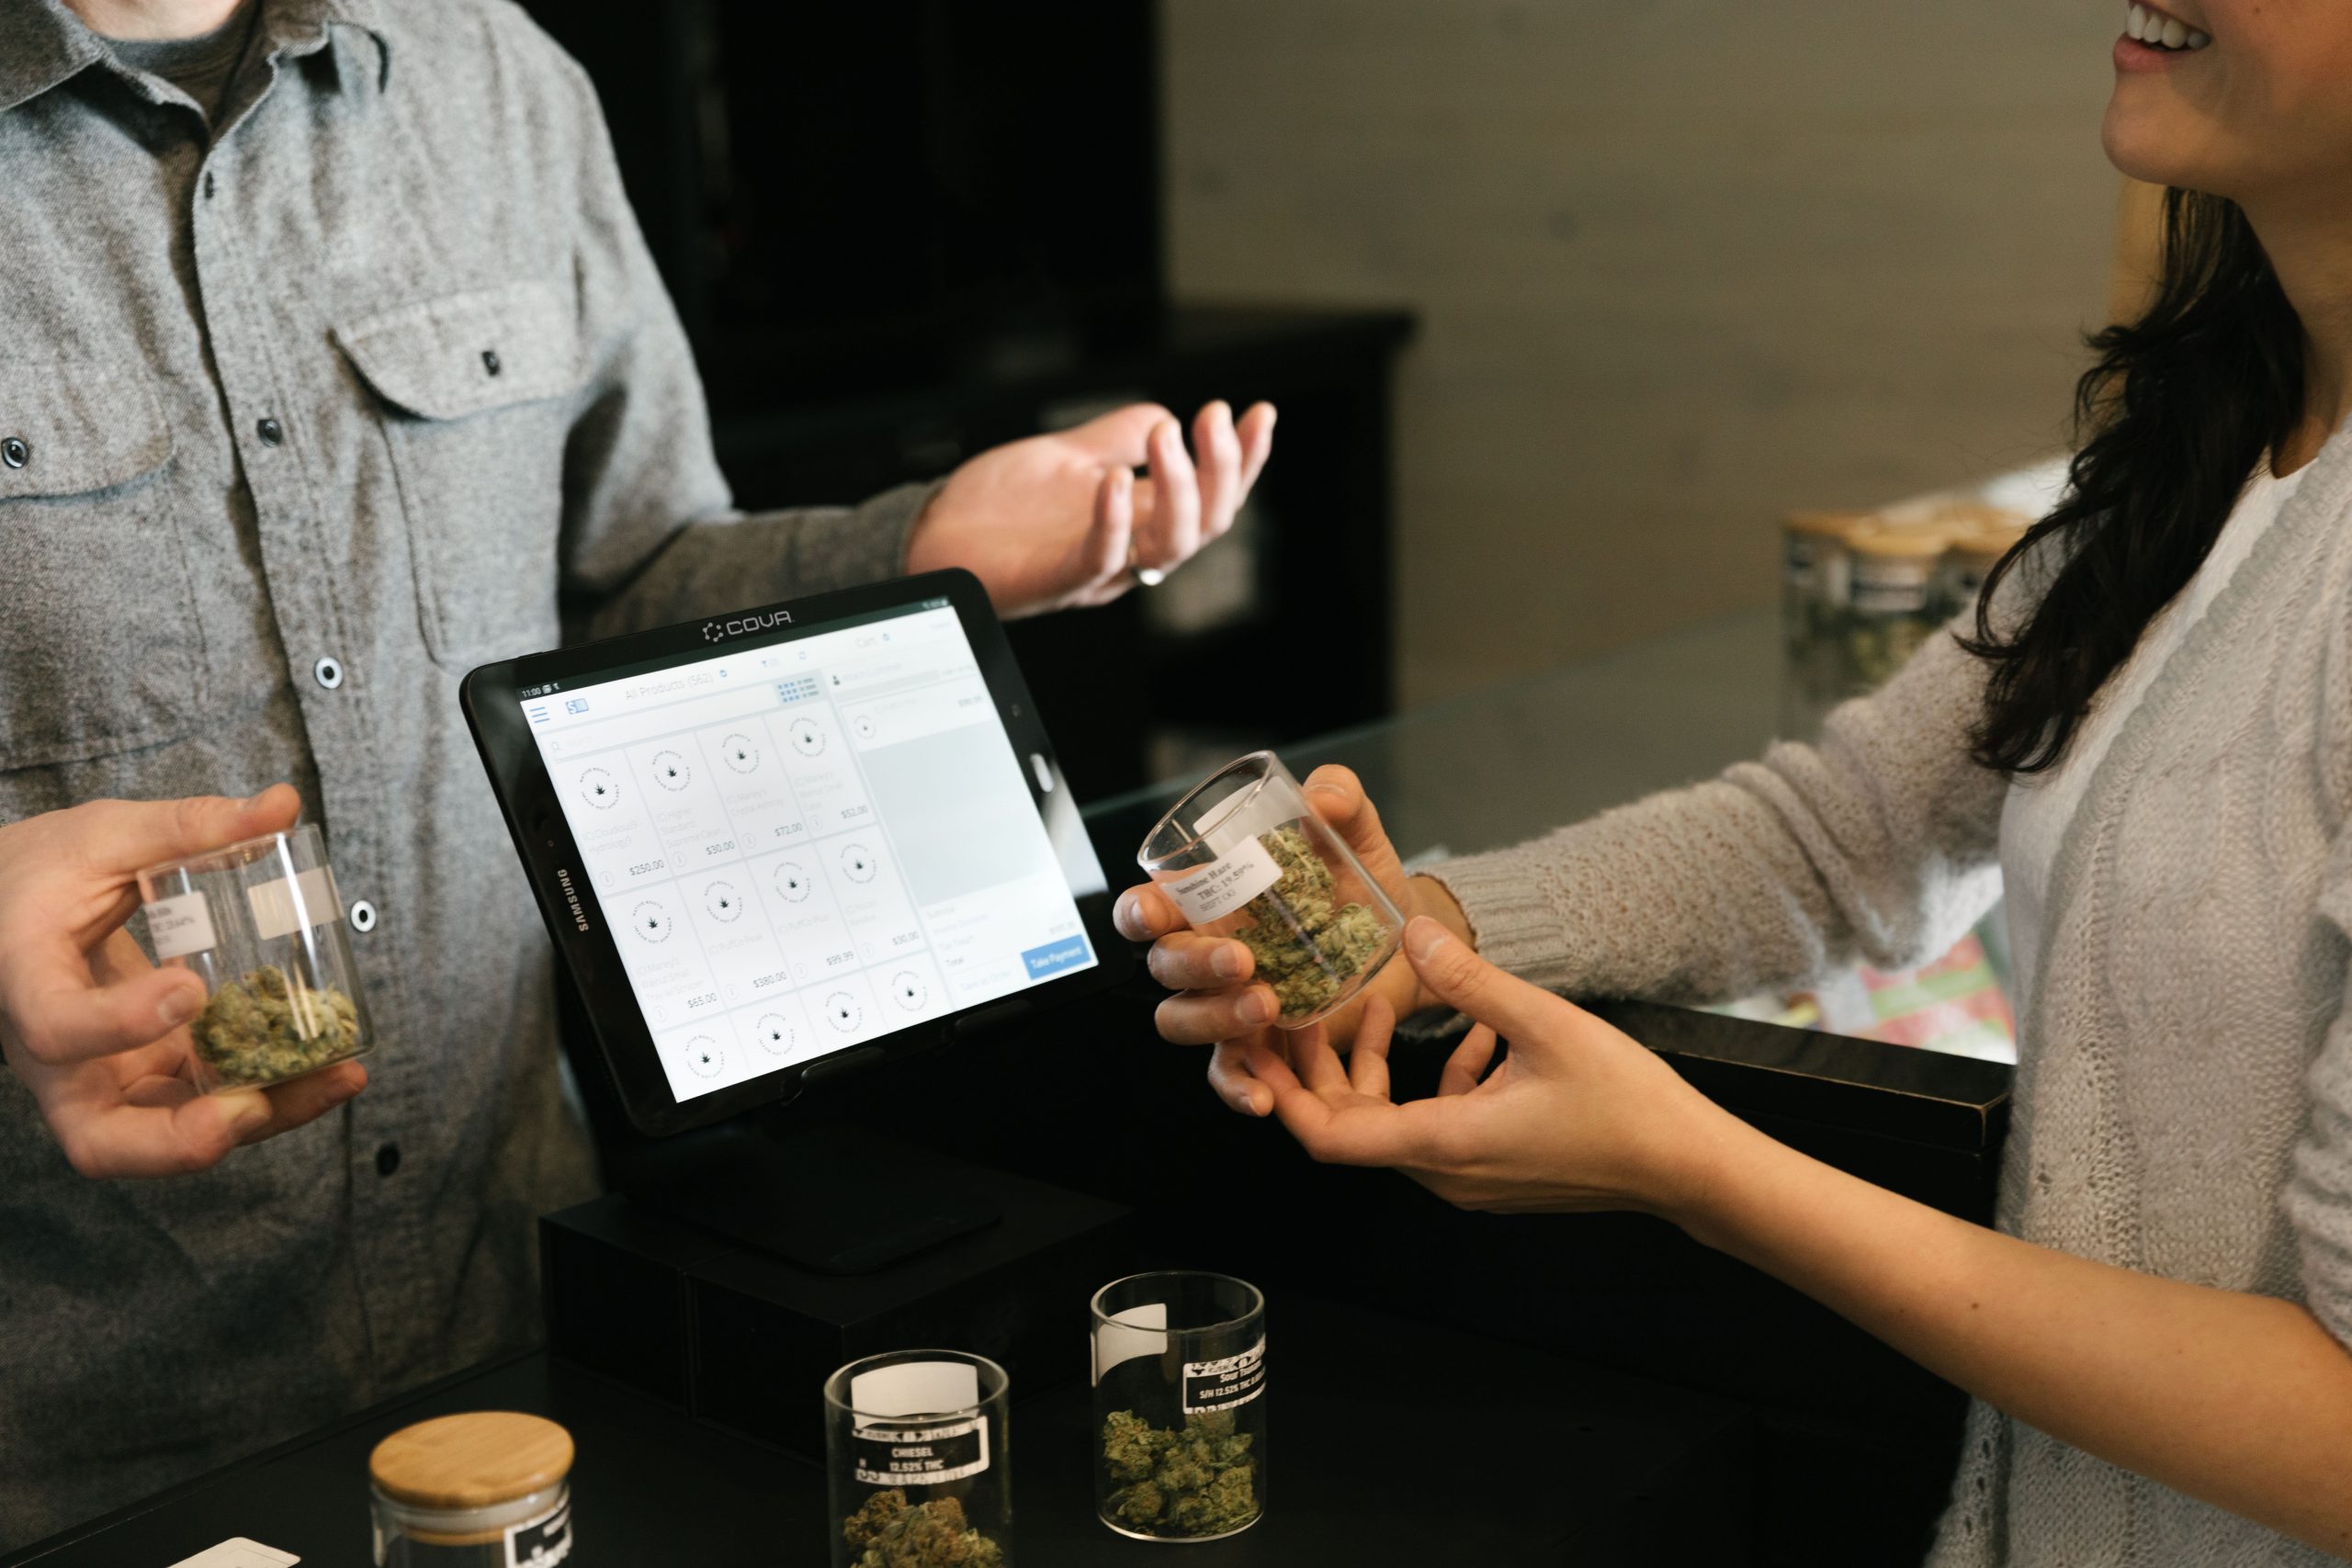 Image shows a transaction happening between a seller and customer. They are both holding the herbal tea product and you can see the till screen between them.